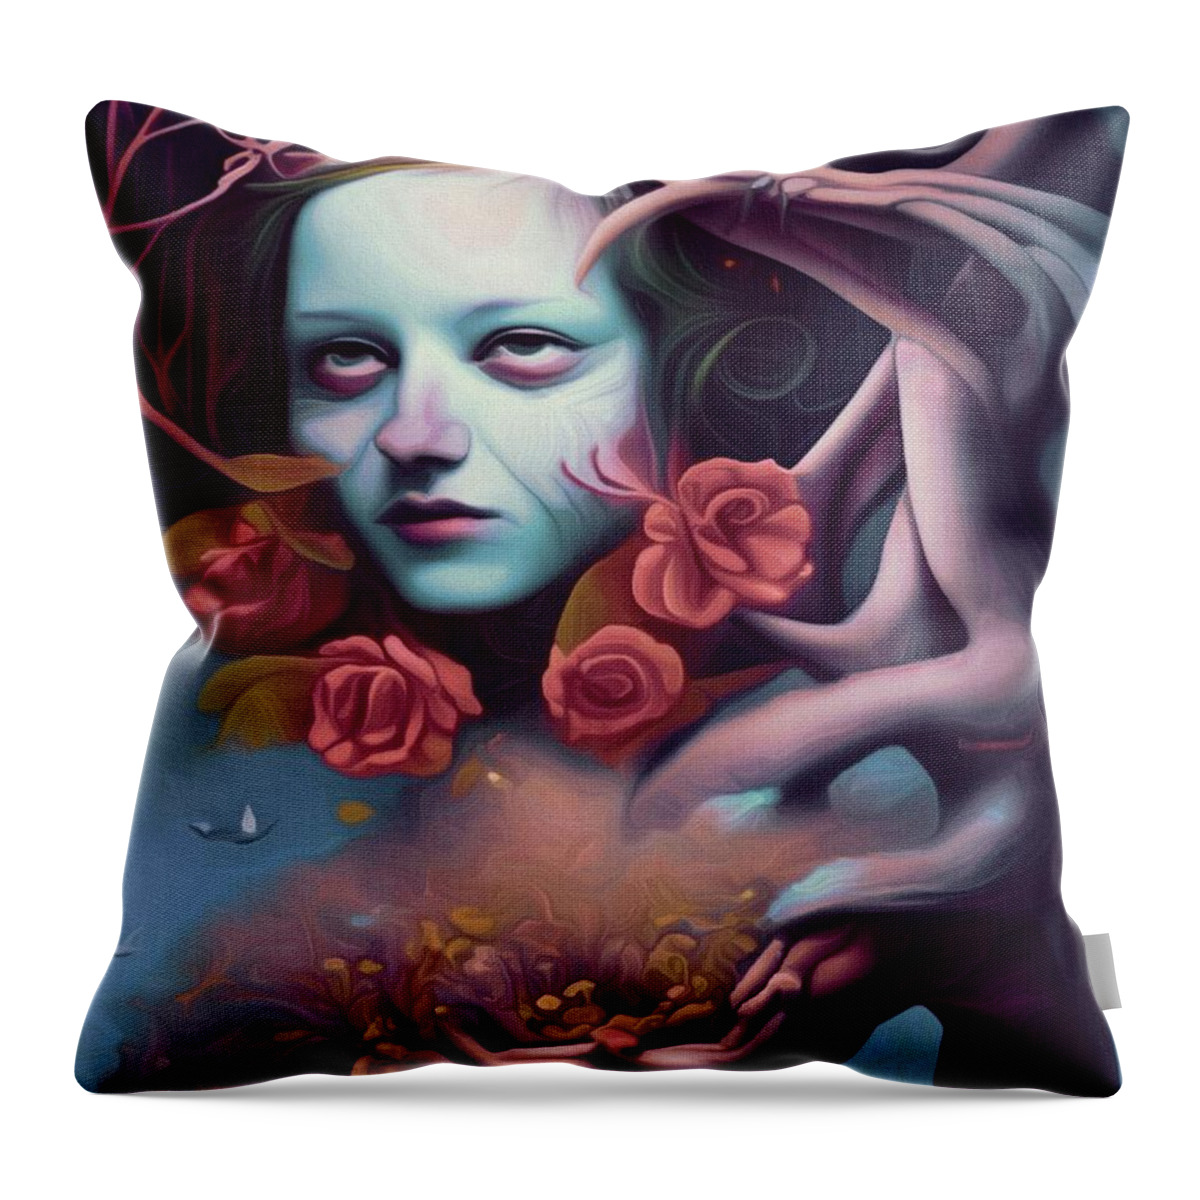  Throw Pillow featuring the digital art Temporary Insanity by Michelle Hoffmann